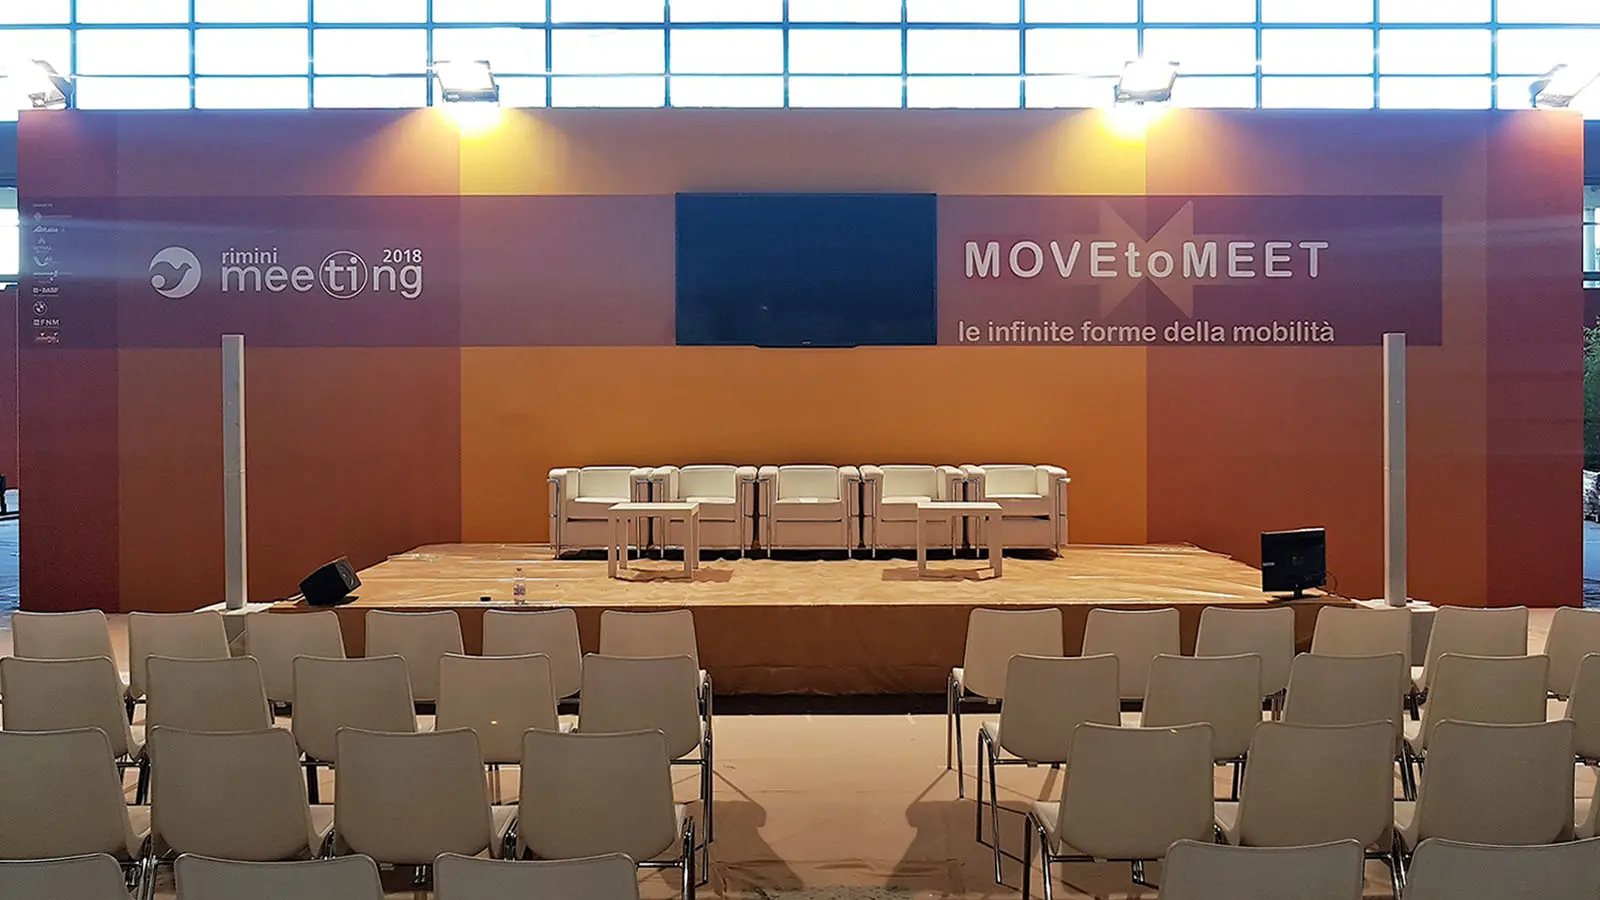 meeting-move-to-meet-2018